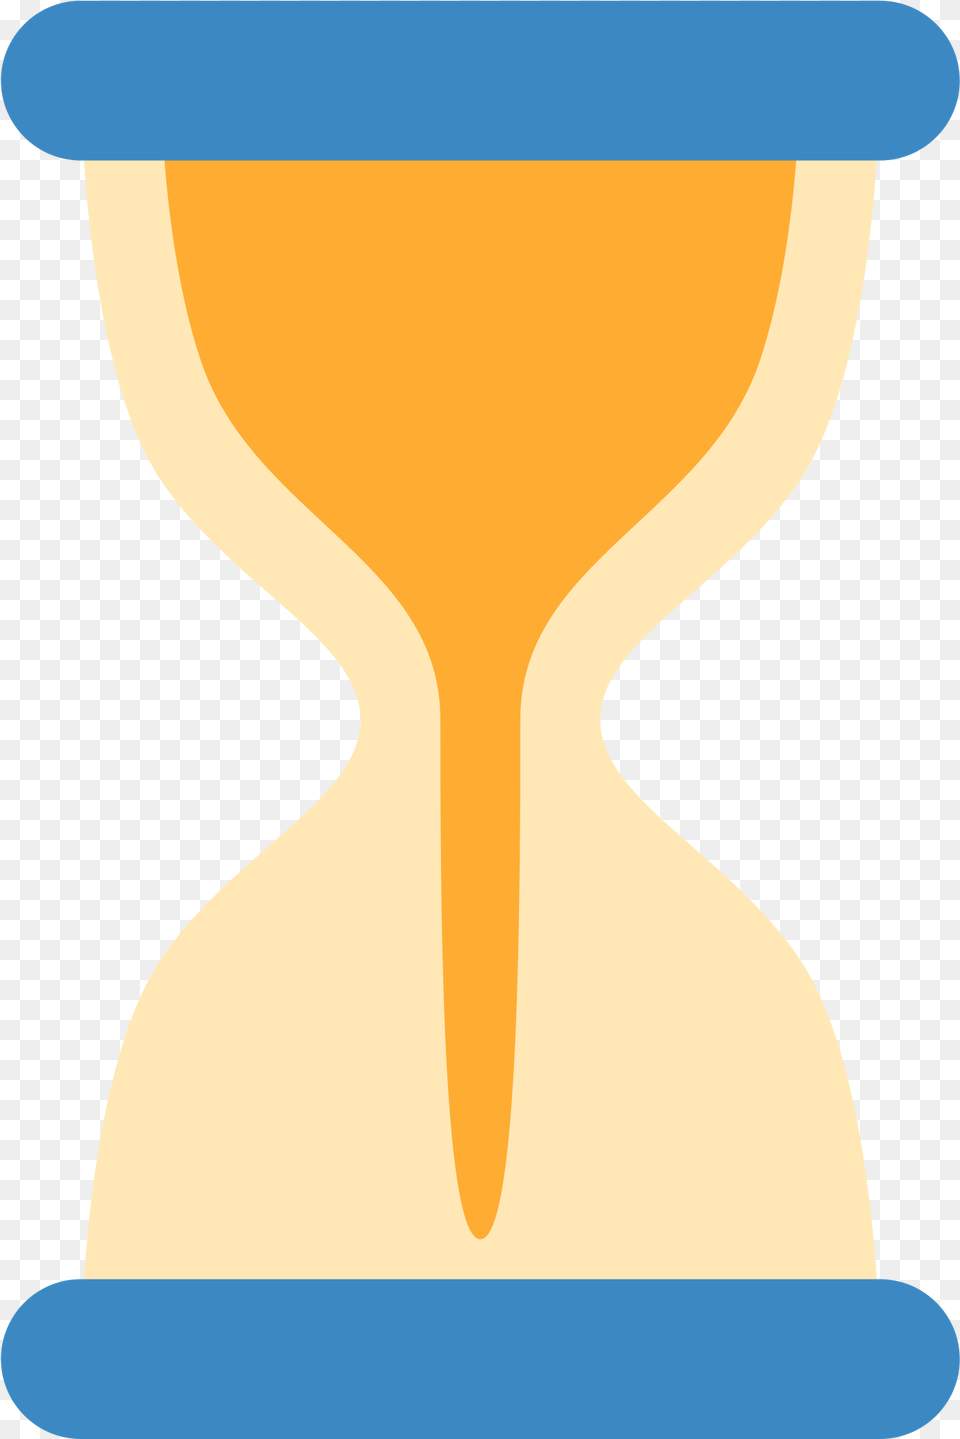 Hourglass With Flowing Sand Sand Clock Icon Png Image